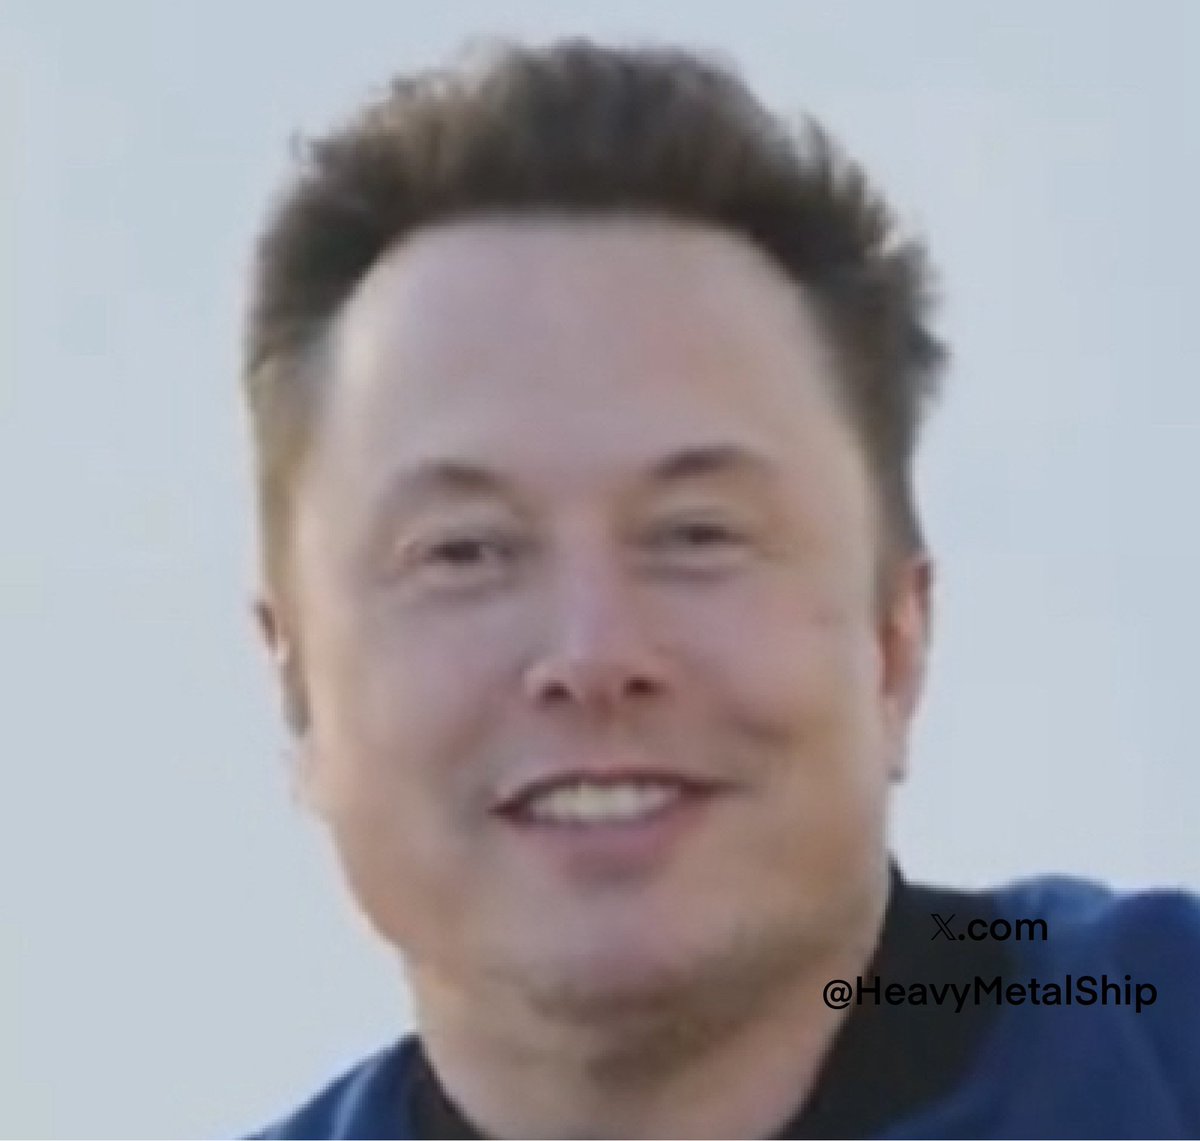 Elon wishes you a nominal day and is wondering if you like his epic haircut? ✨💕